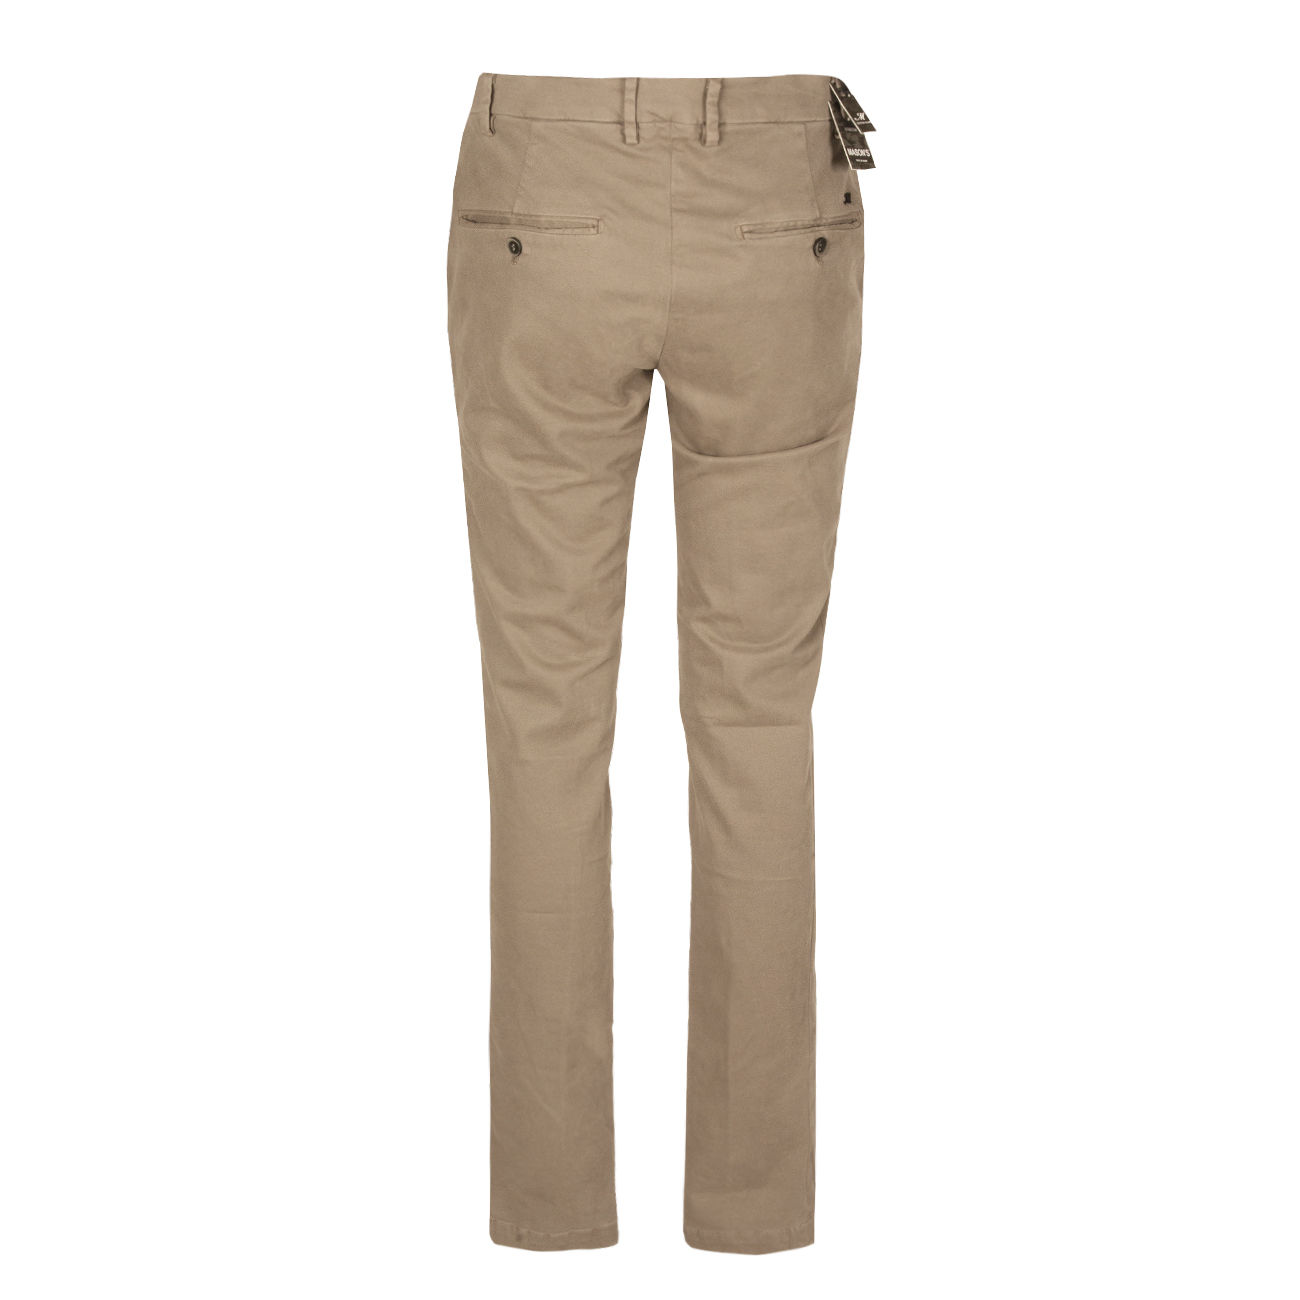 How to Wear Beige Chinos (554 looks), Men's Fashion